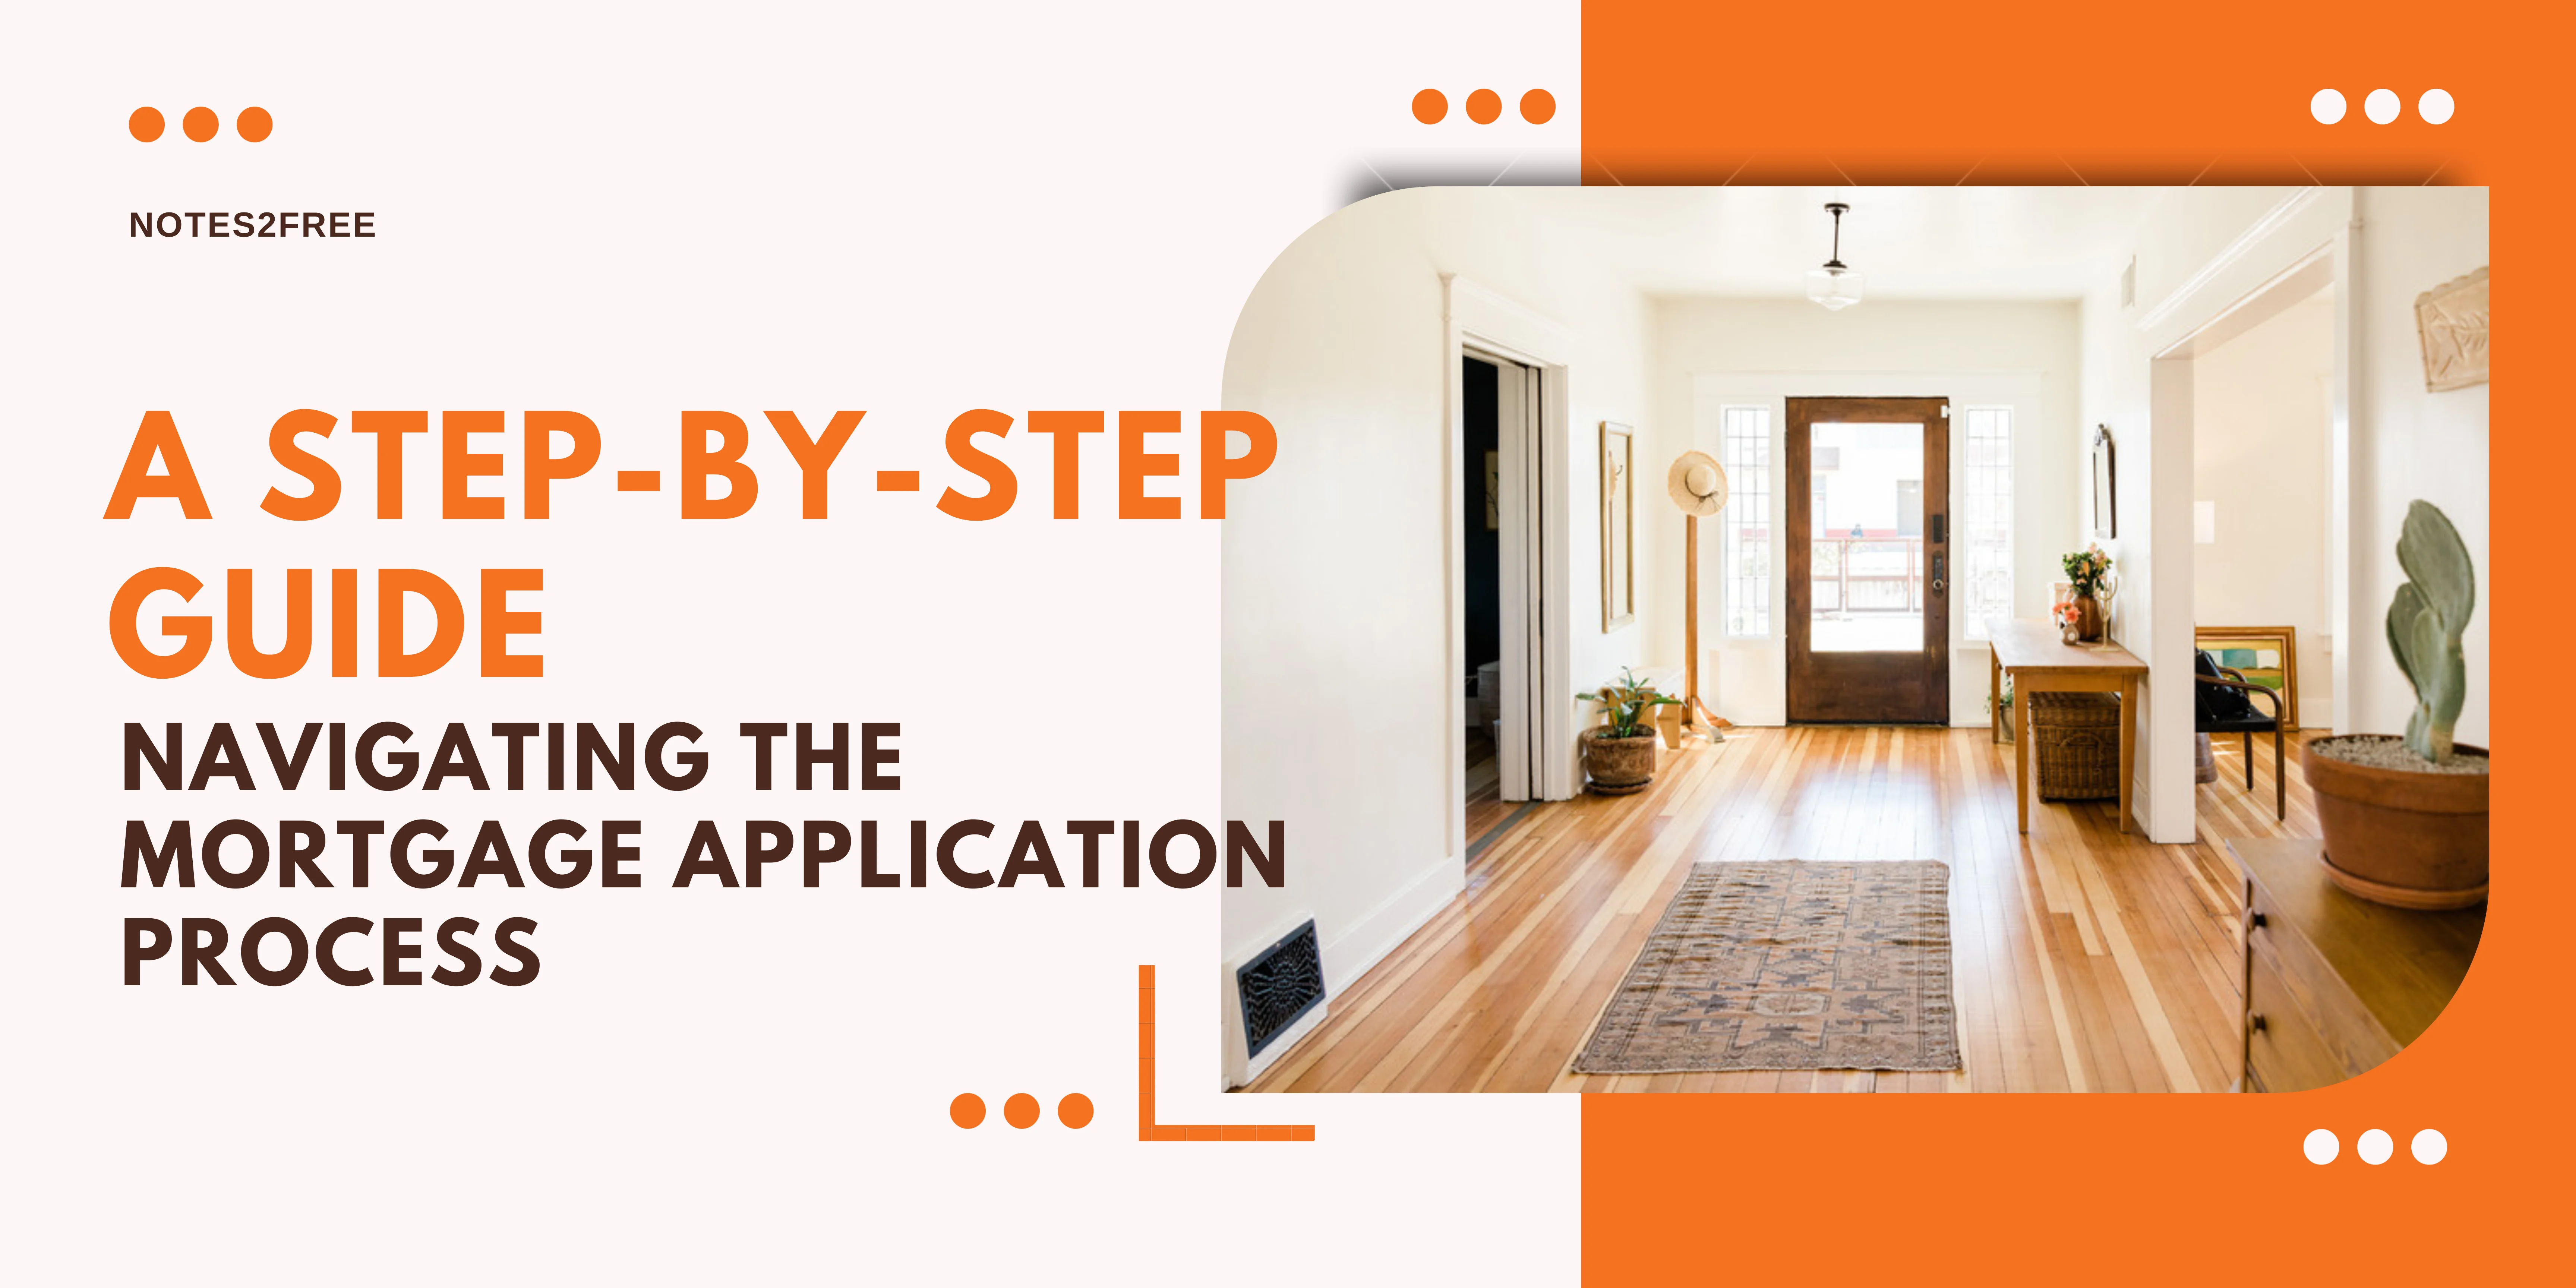 Navigating the Mortgage Application Process: A Step-by-Step Guide